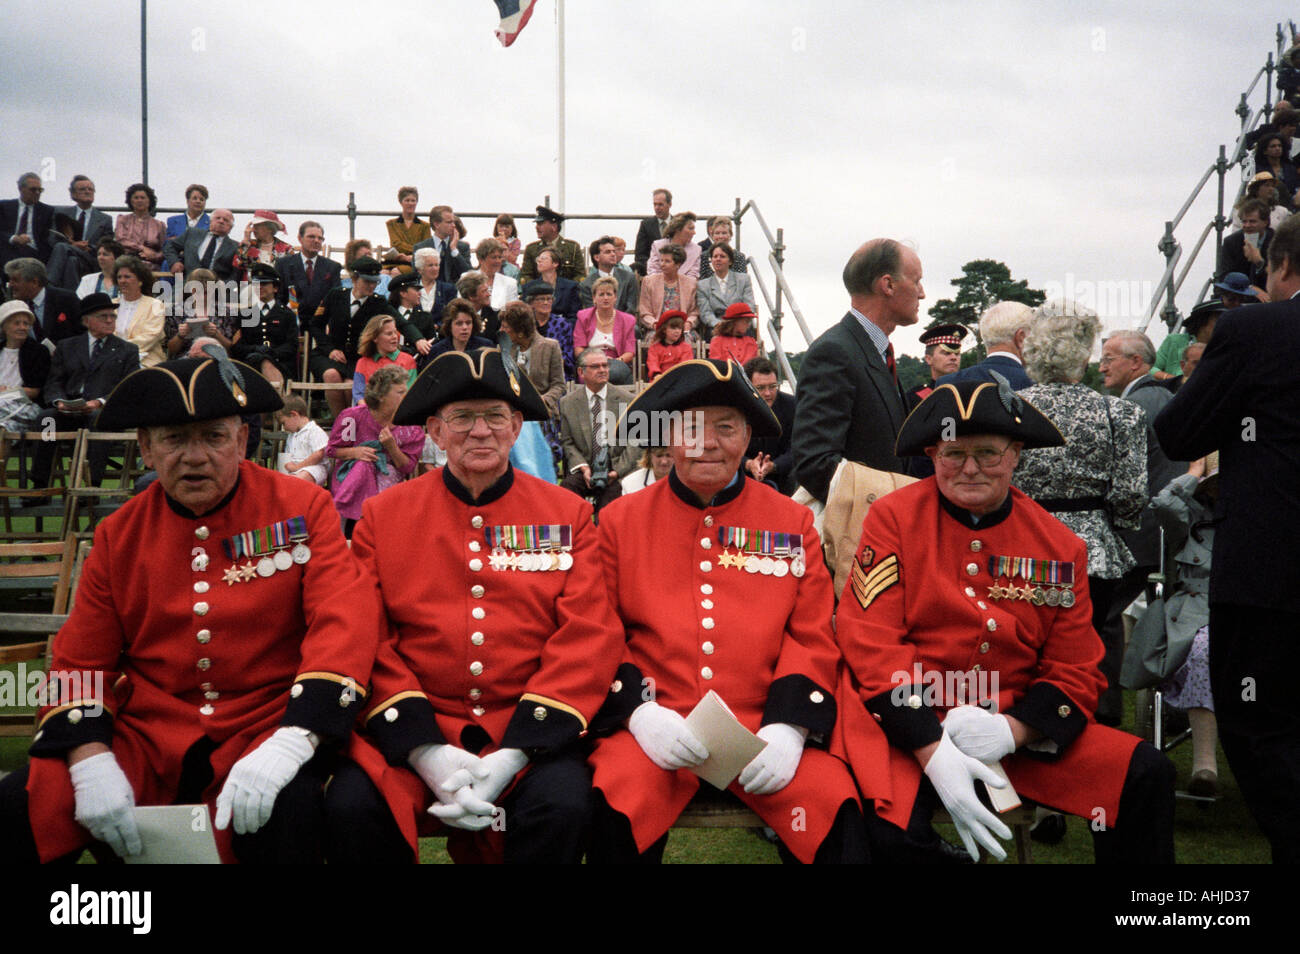 Four Chelsea Pensioners in full ceremonial uniform in front of crowd at formal event at Royal Military Academy Sandhurst. Sandhurst, UK. Stock Photo